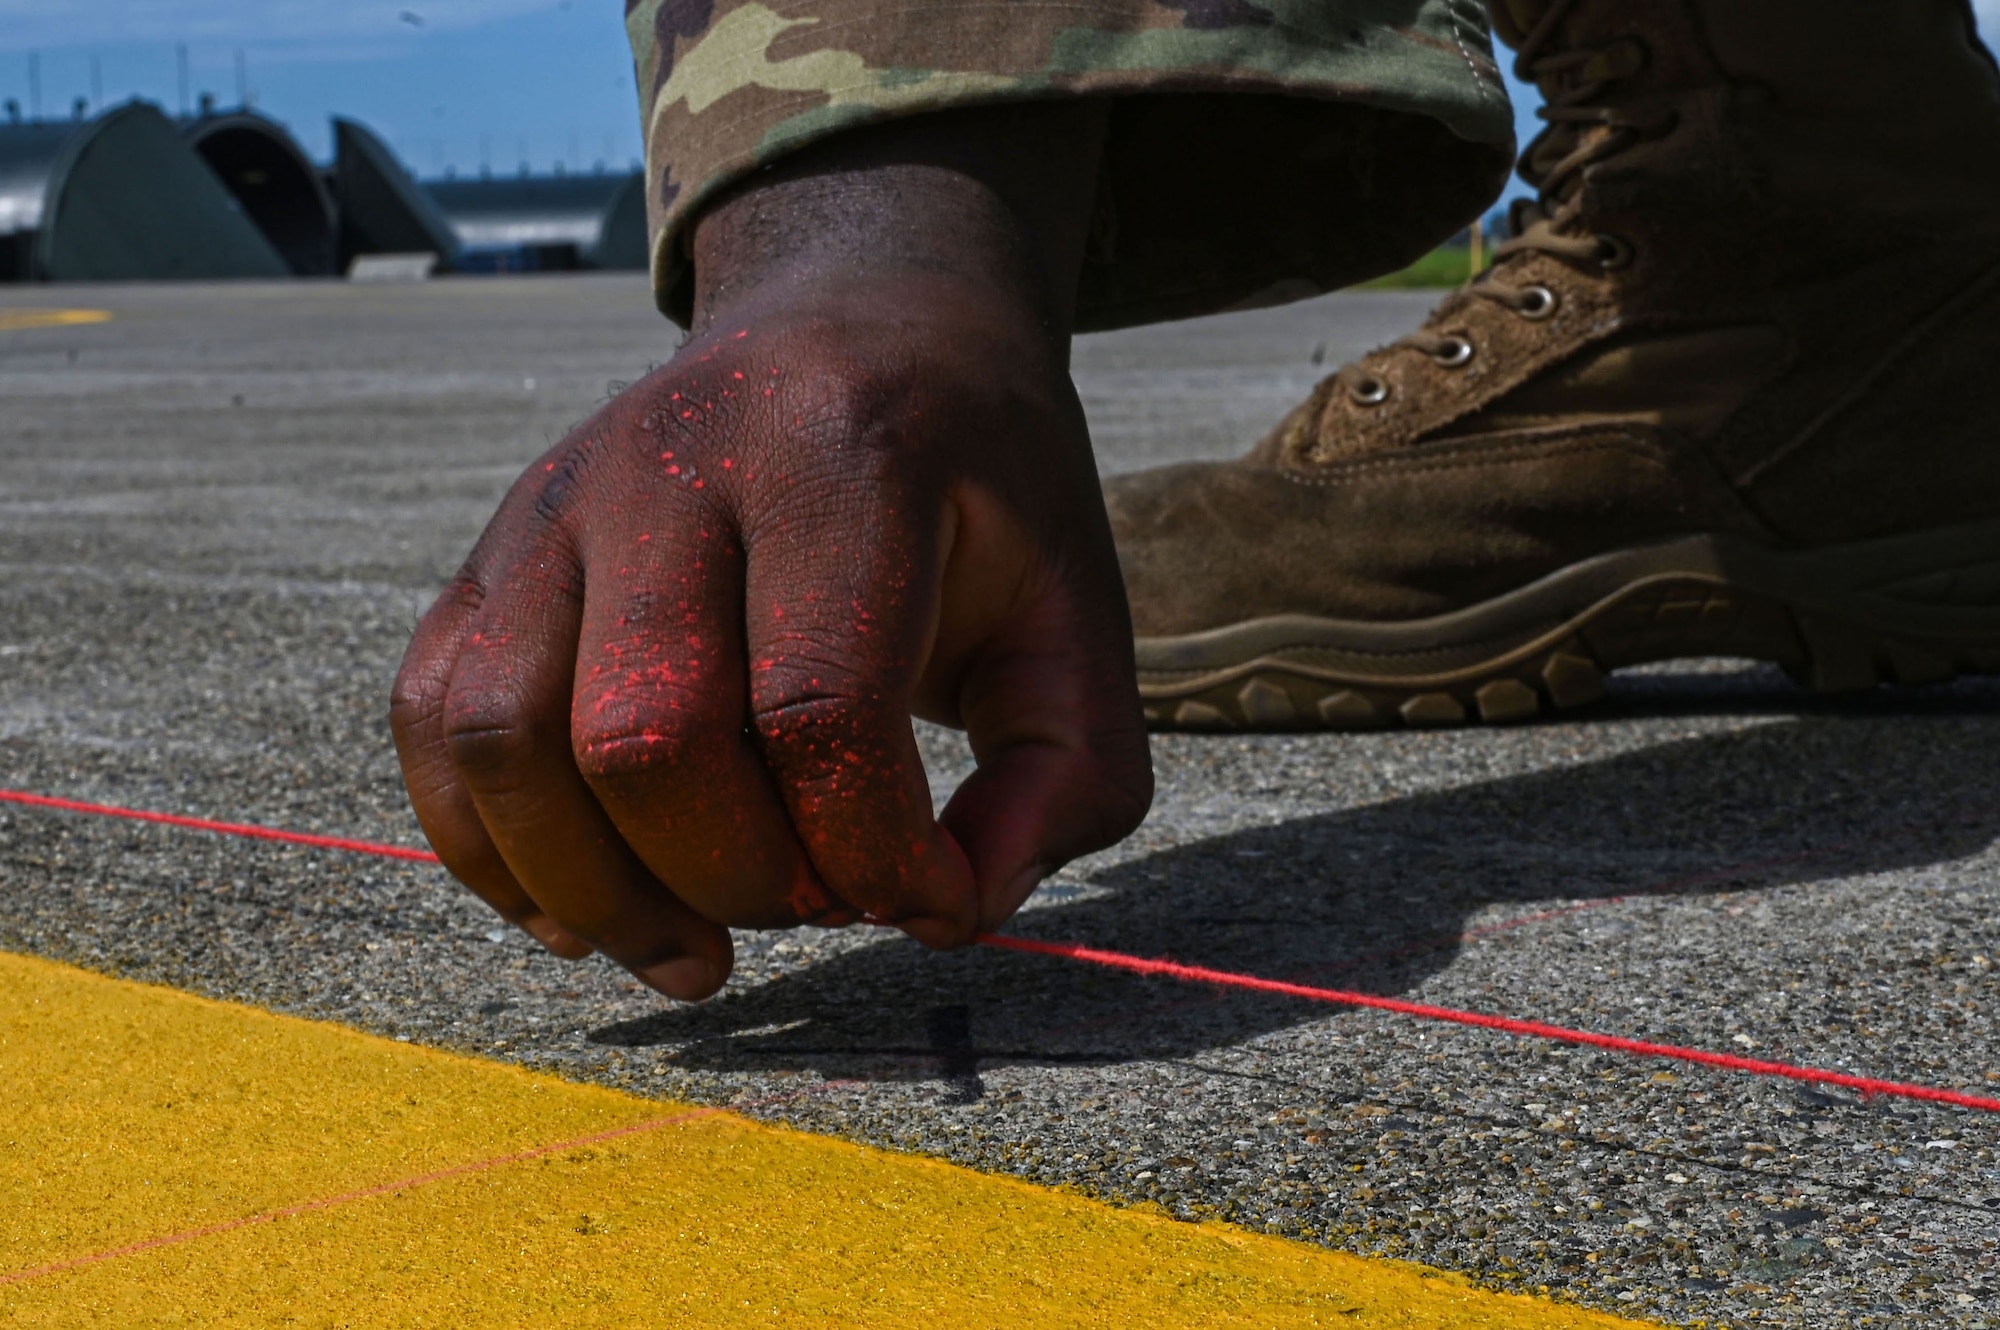 U.S. Air Force Staff Sgt. David Crowey, 87th Electronic Warfare Squadron Combat Shield avionics electronic warfare (EW) technician, pops a chalk line for measurement to test the AN/ASQ-213 HARM Targeting Systems, at Misawa Air Base, Japan, Aug. 9, 2023. Combat Shield ensured U.S. Air Force air assets at Misawa AB, Japan, have EW combat readiness and are effective to support a free and open Indo-Pacific. (U.S. Air Force photo by Staff Sgt. Ericka A. Woolever)